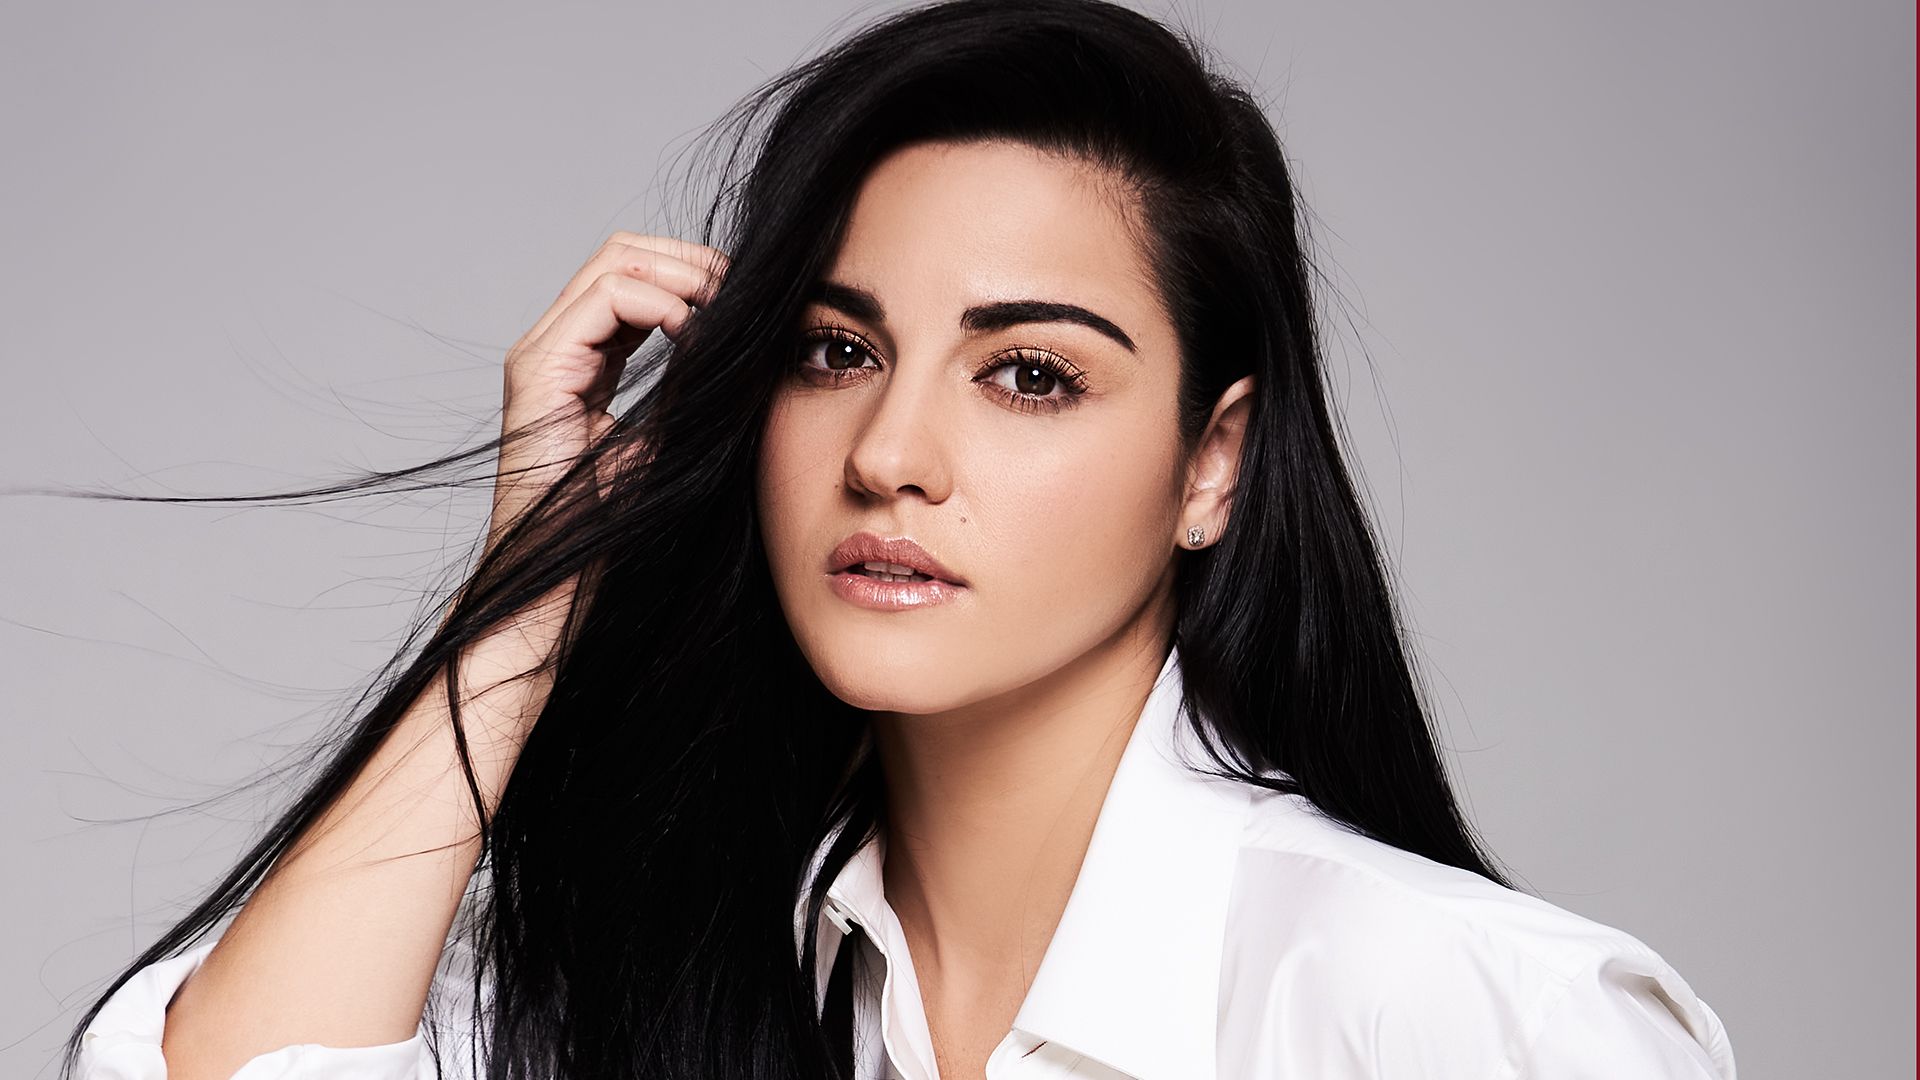 8-captivating-facts-about-maite-perroni